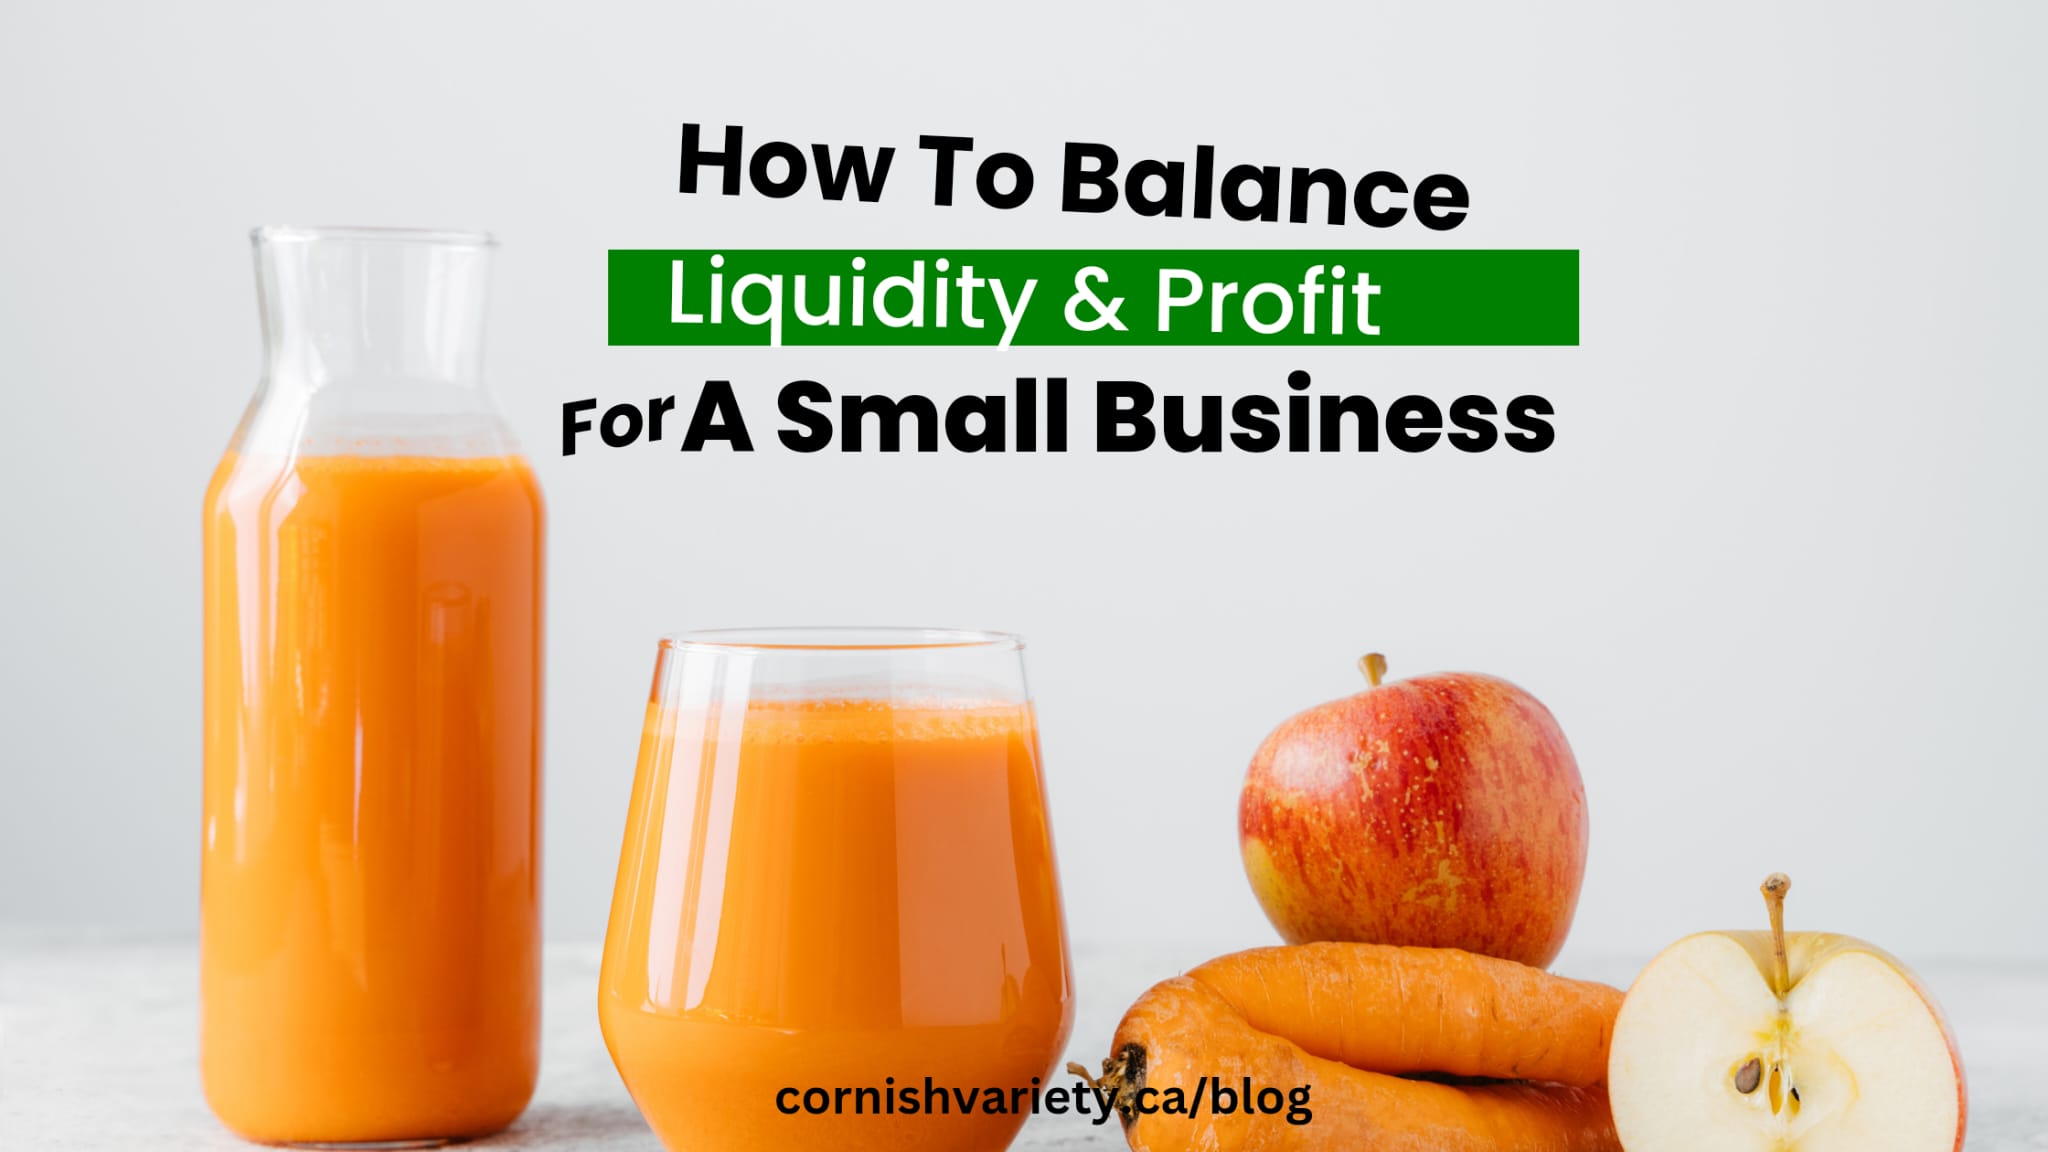 How To Balance Liquidity & Profit For A Small Business